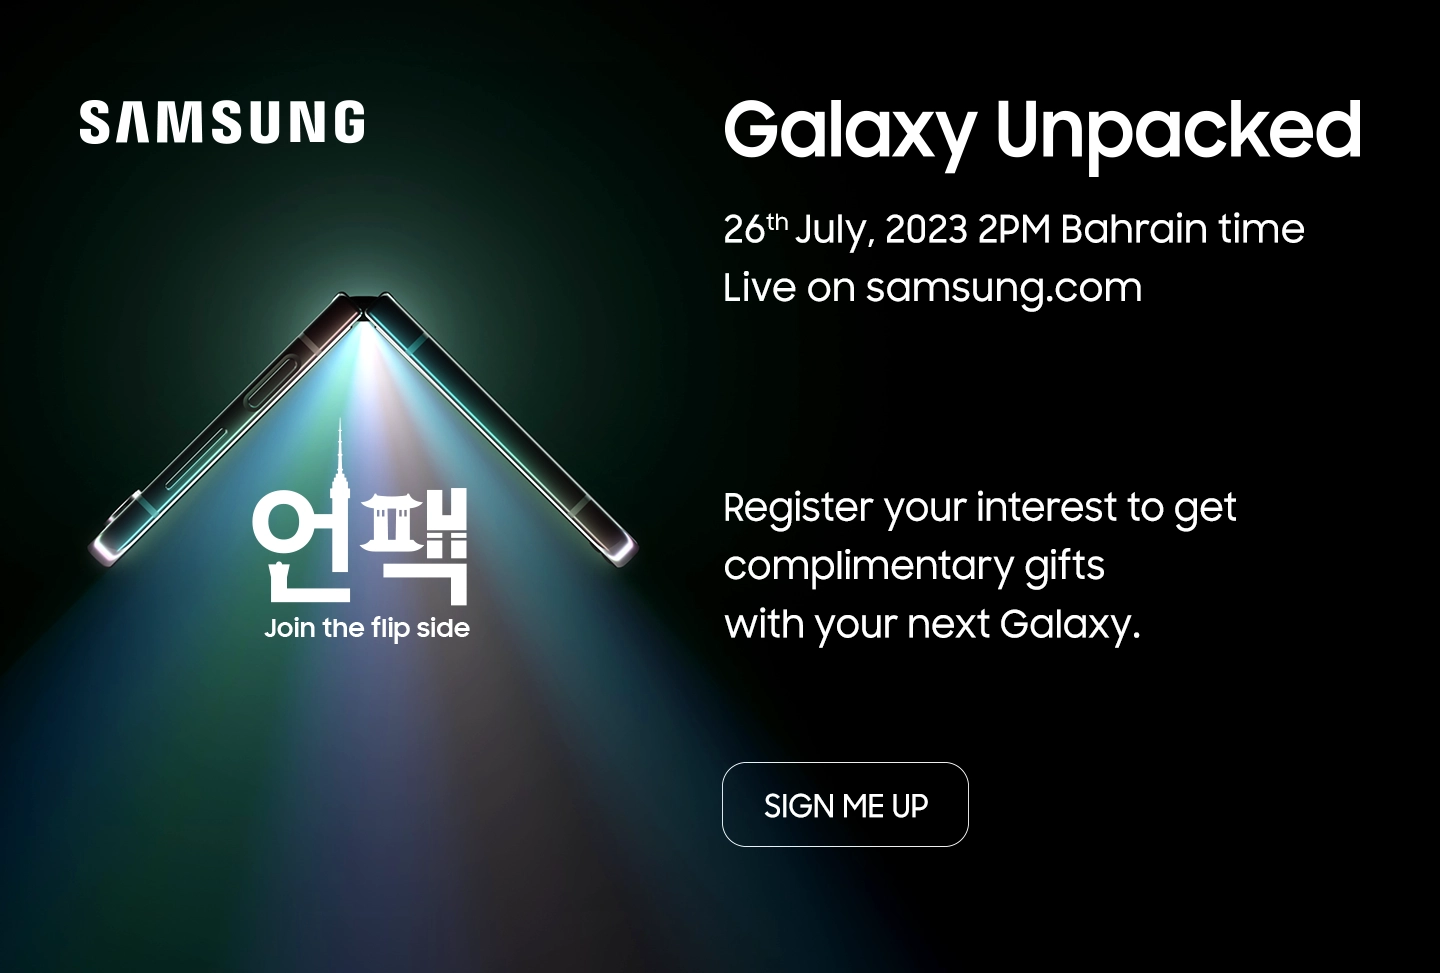 Register your interest in the next Galaxy